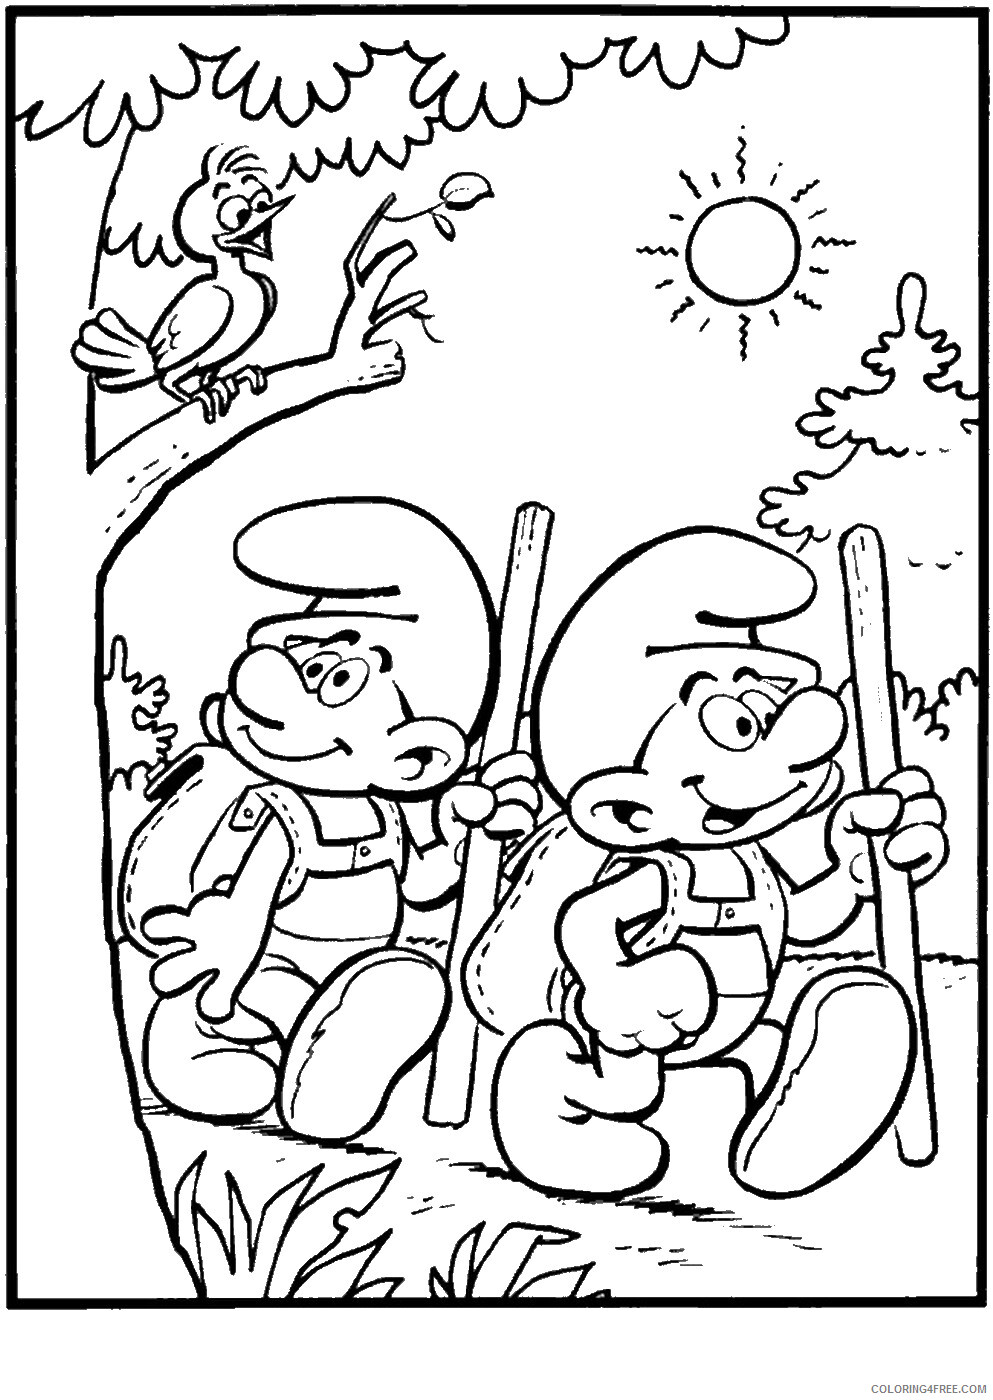 The Smurfs Coloring Pages TV Film smurfs_49 Printable 2020 09746 Coloring4free